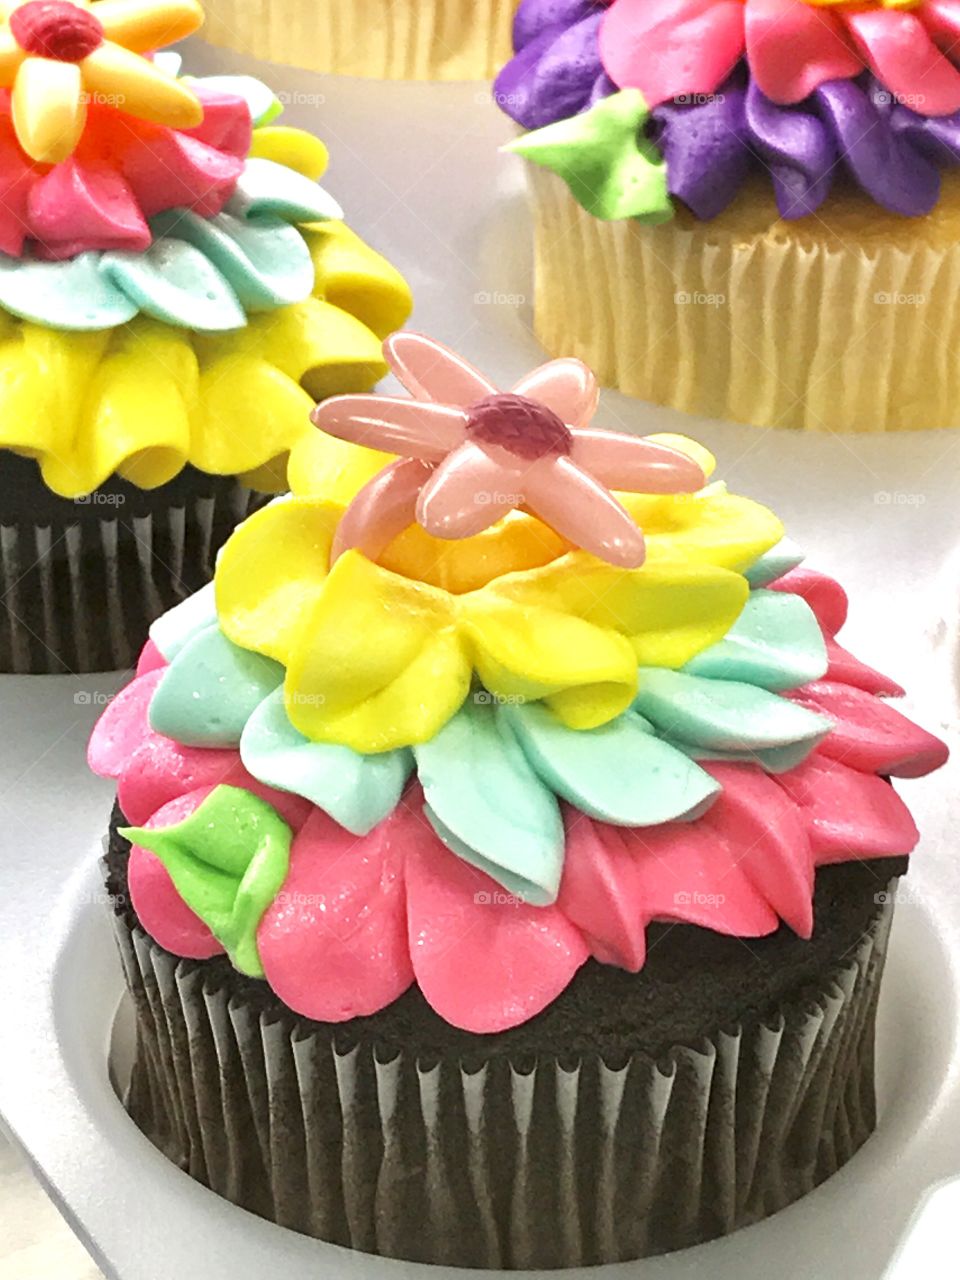 Chocolate cupcake with bright colorful frosting 